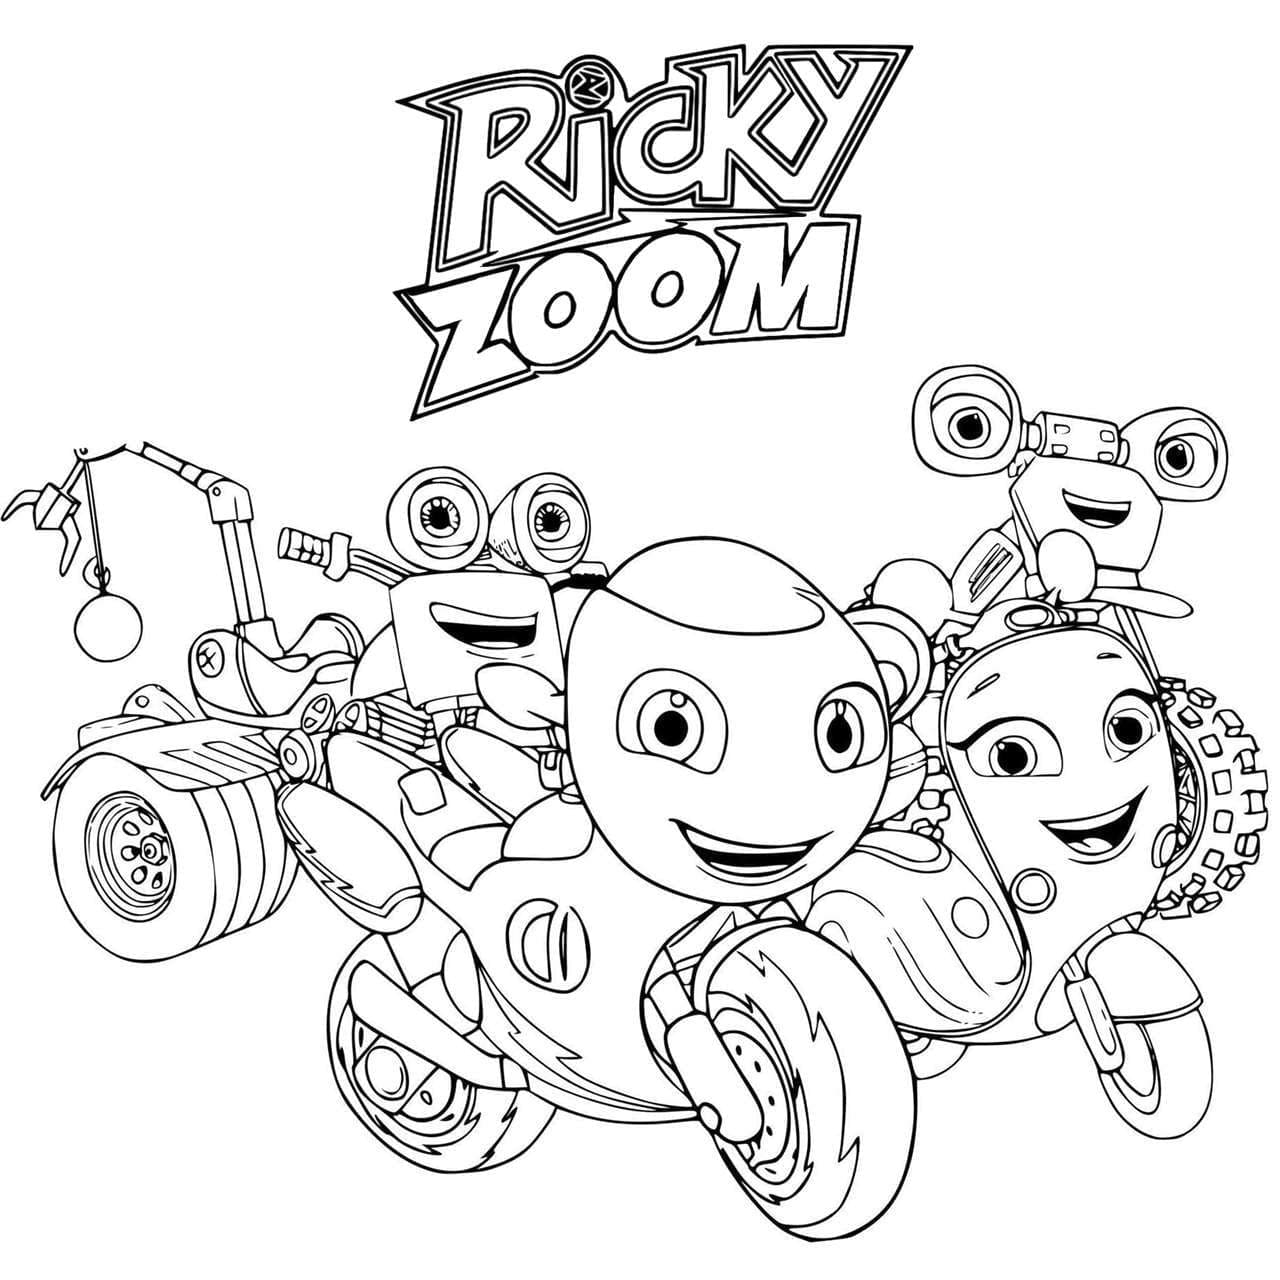 Free Printable Ricky Zoom coloring page - Download, Print or Color ...